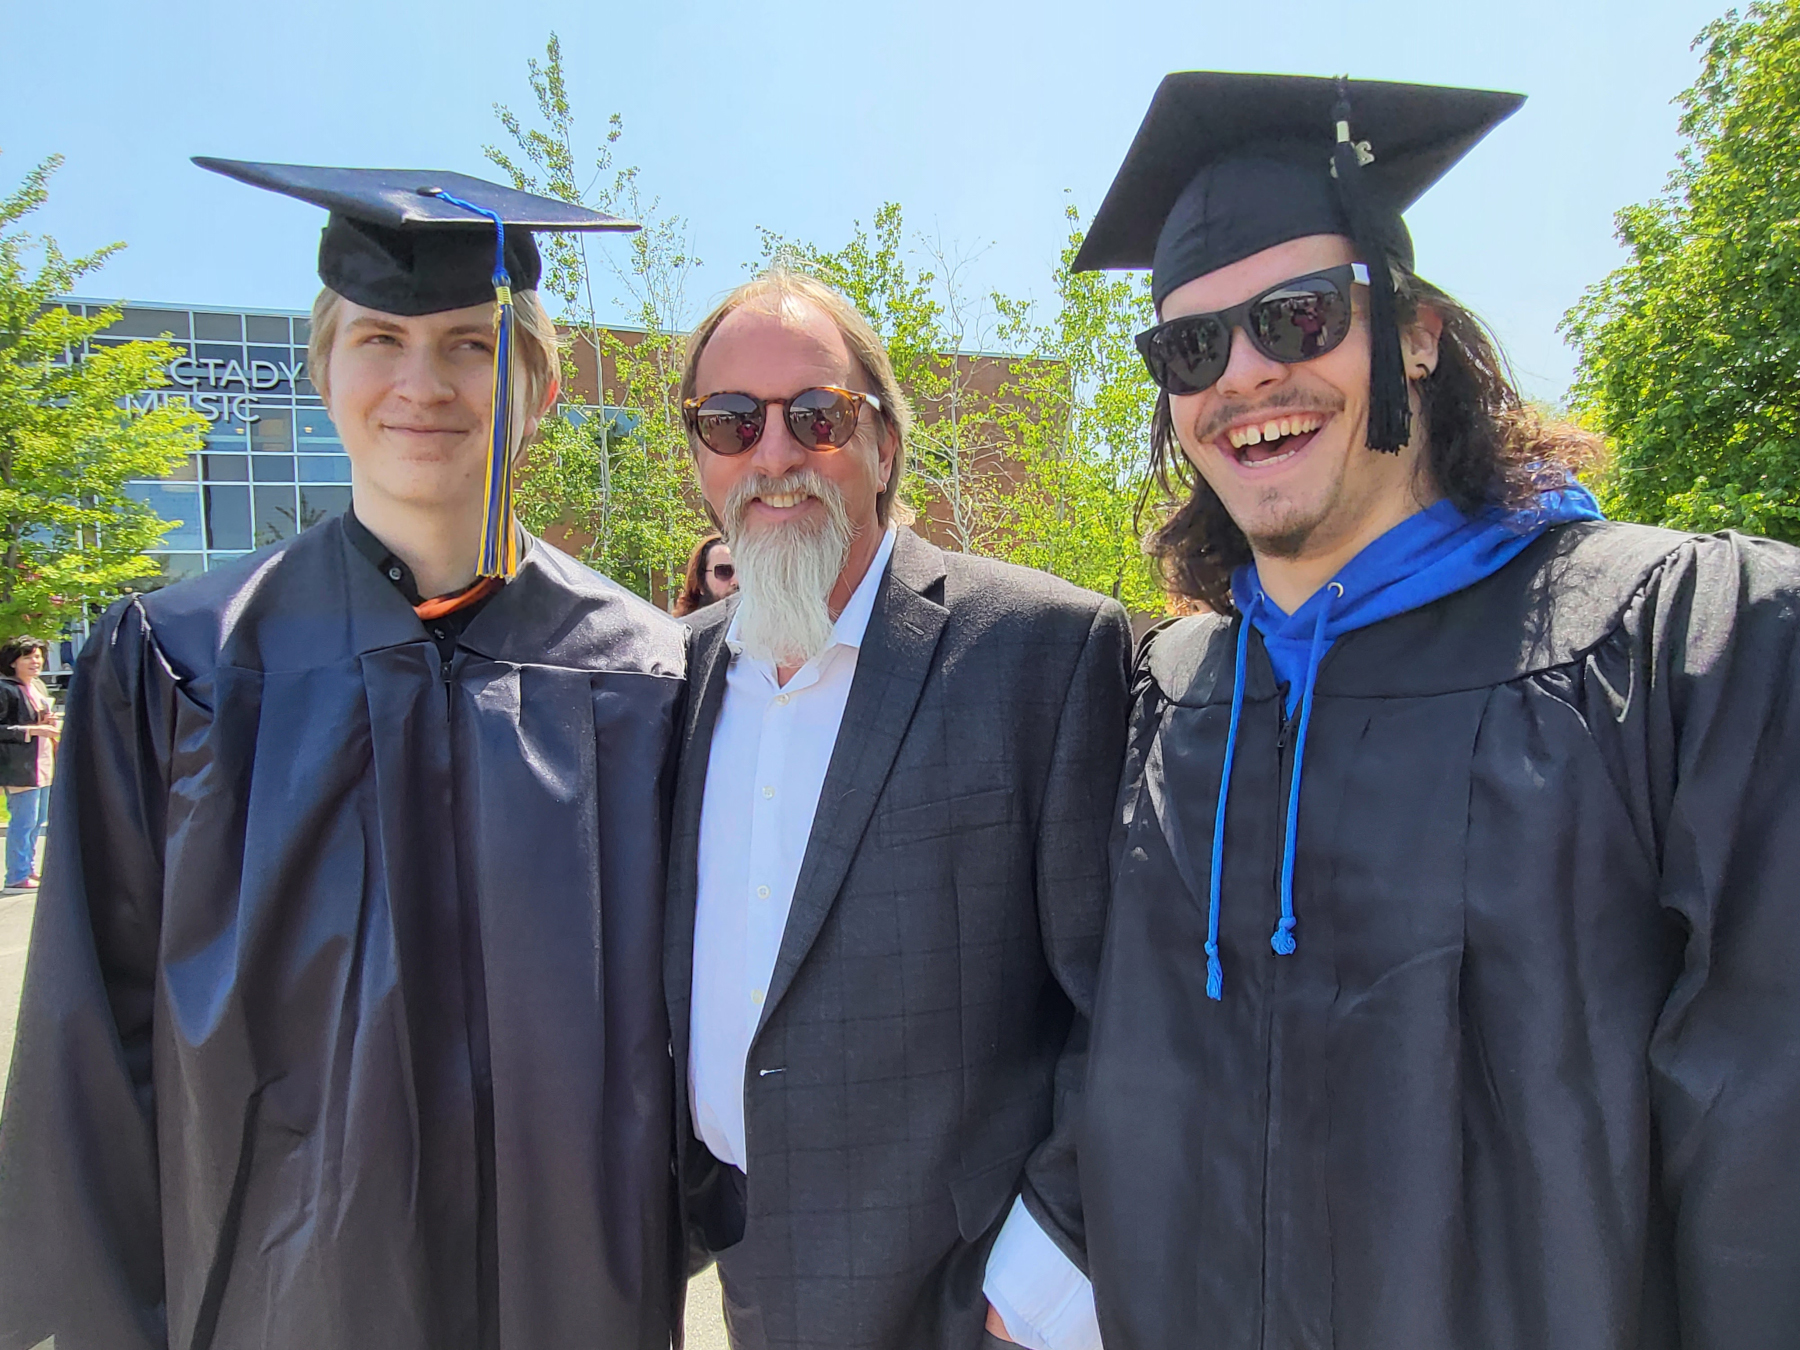 Sten Isachsen with music graduates, outside, smiling 